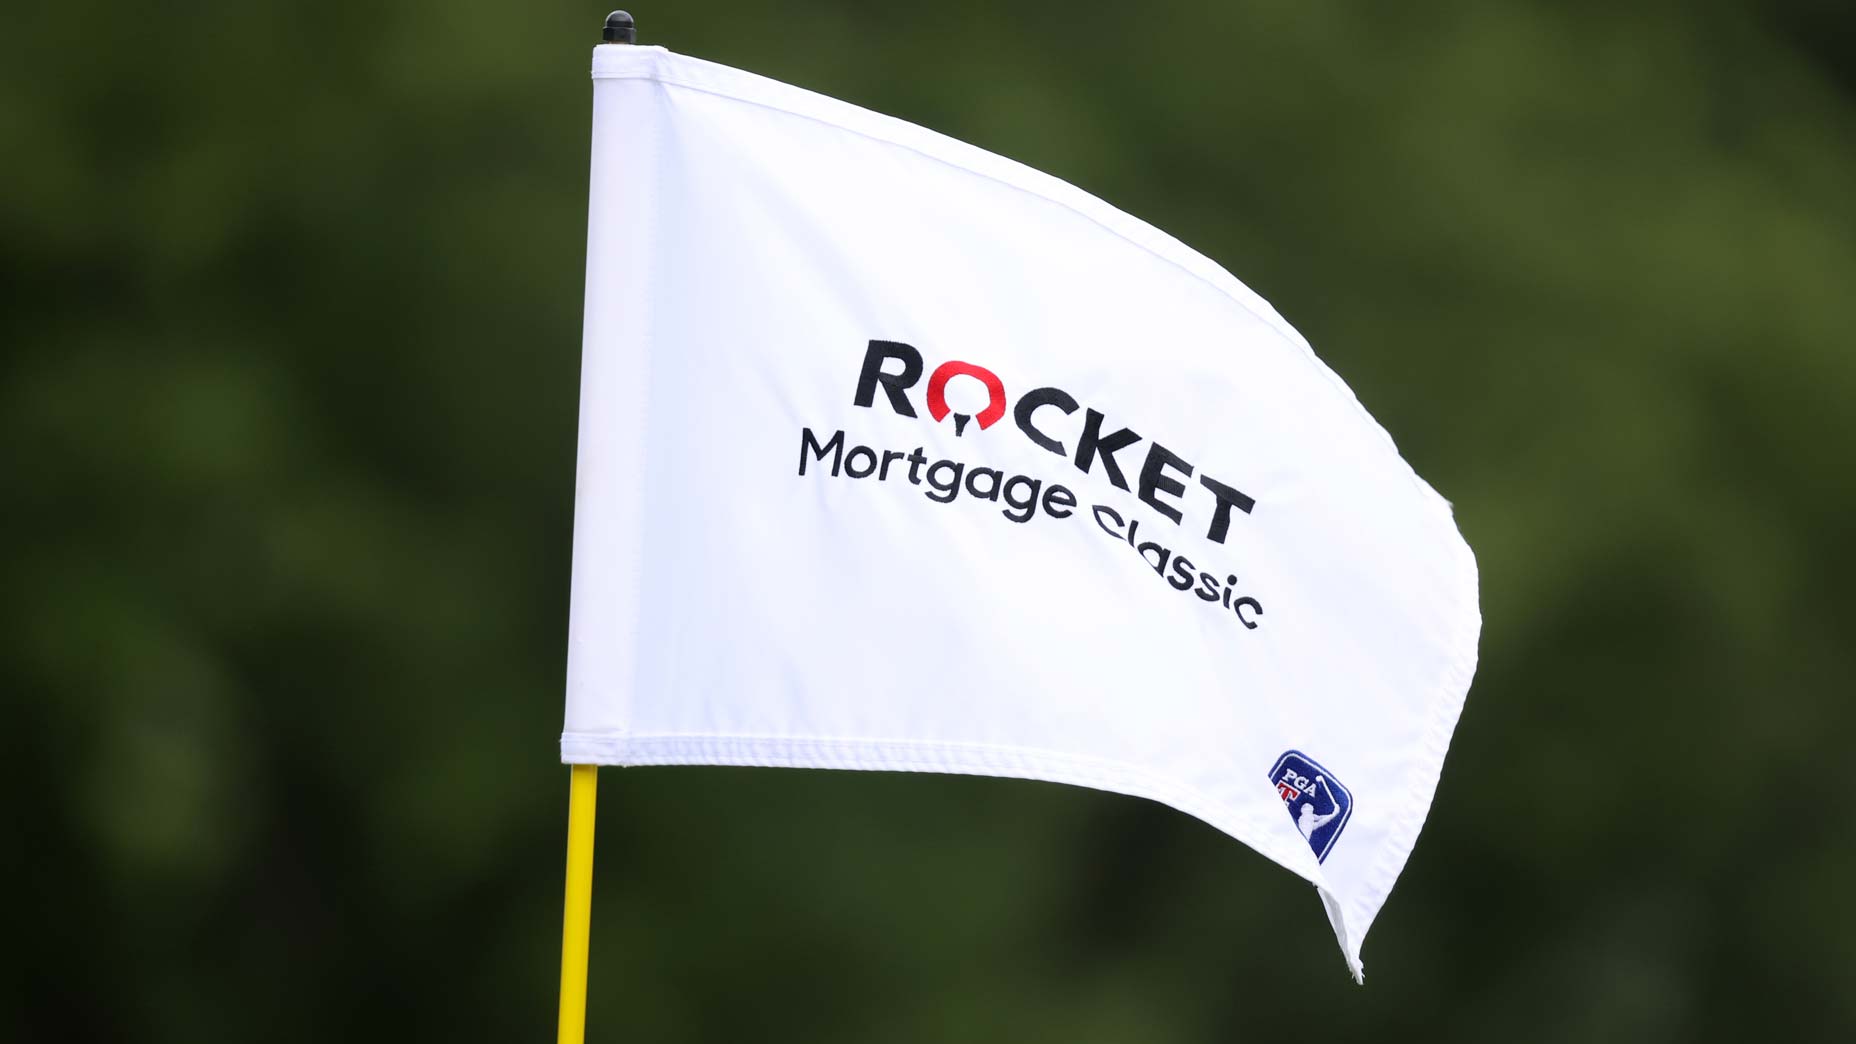 rocket mortgage classic saturday tee times